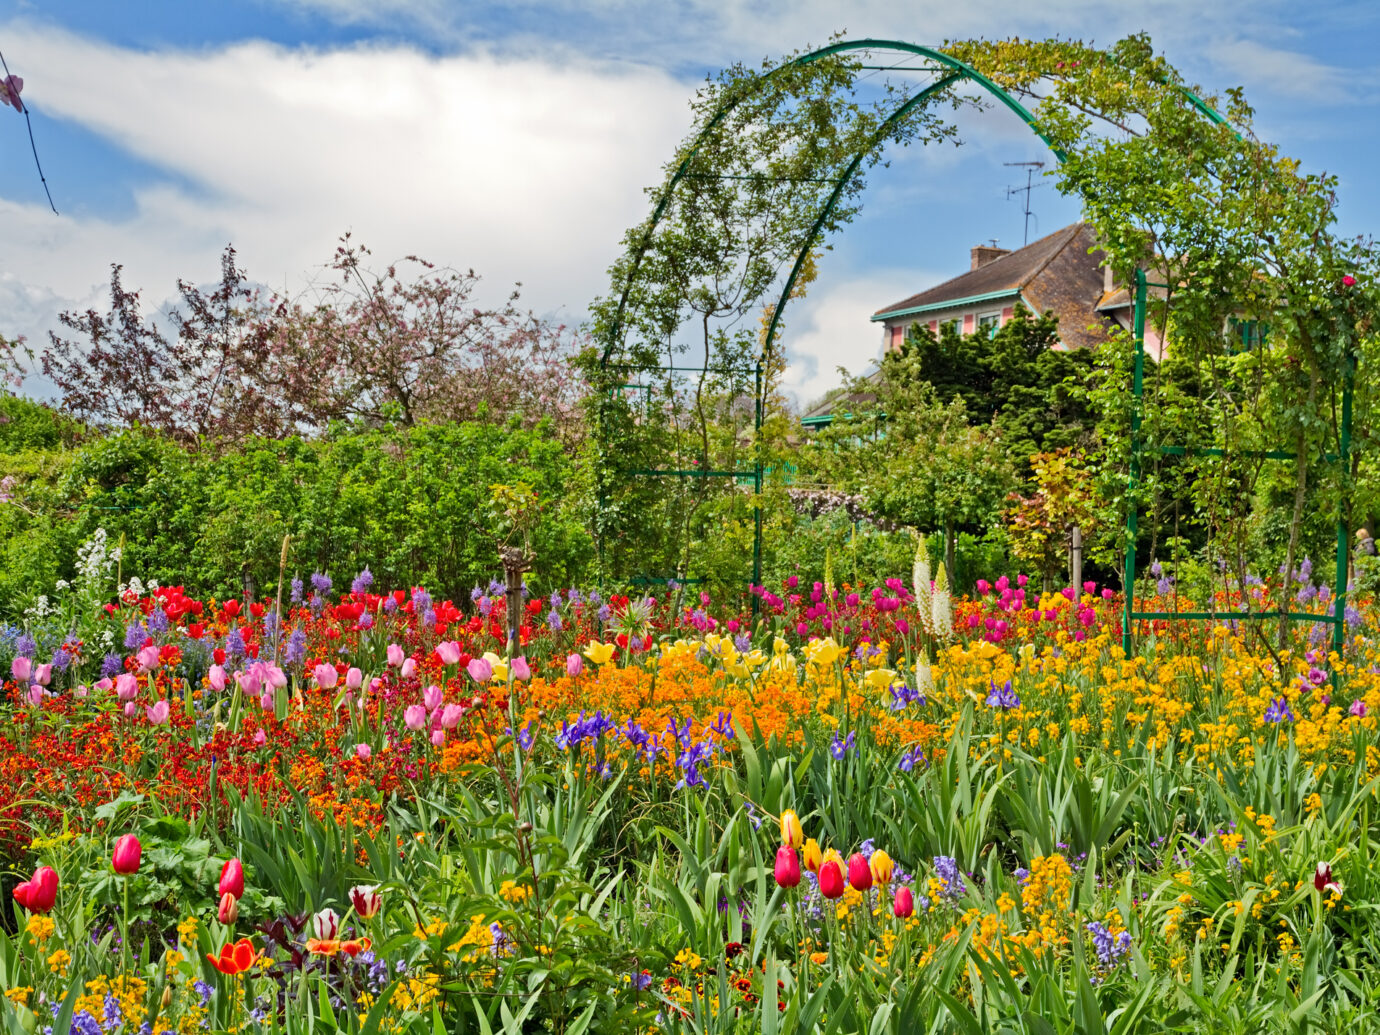 Beautiful garden at spring, Giverny, France.